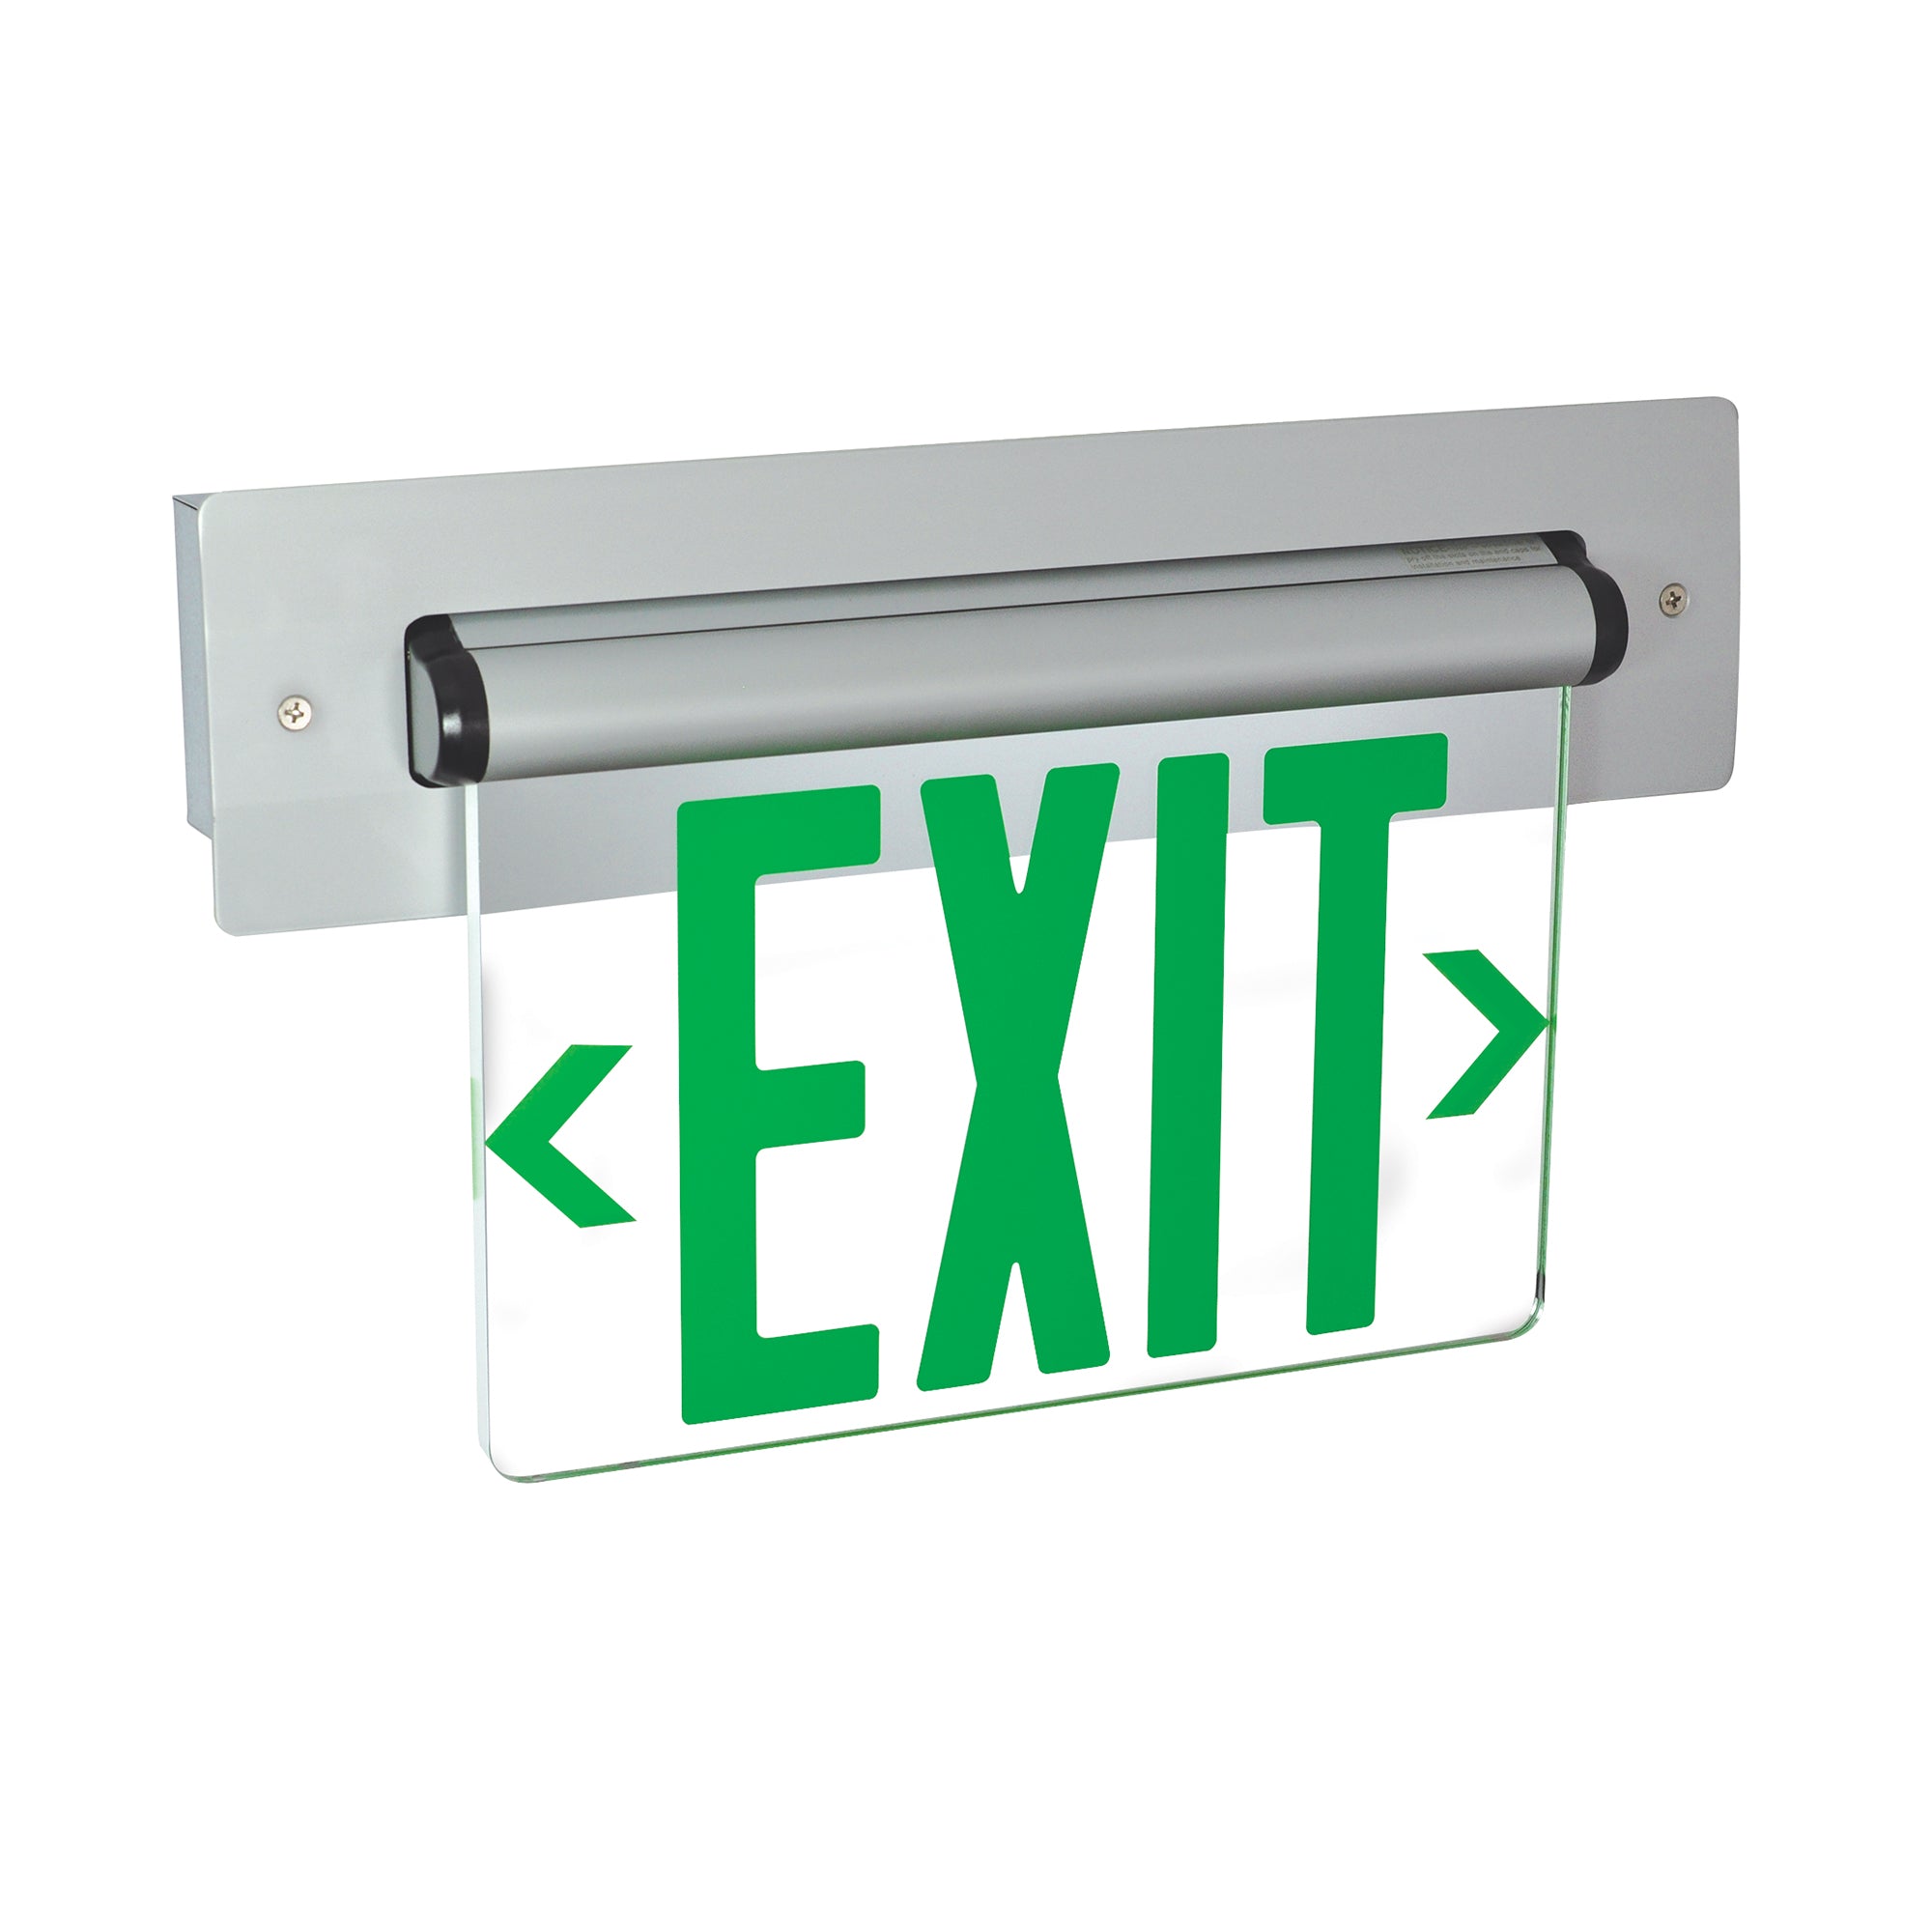 Nora Lighting NX-814-LEDGCW - Exit / Emergency - Recessed Adjustable LED Edge-Lit Exit Sign, 2 Circuit, 6 Inch Green Letters, Single Face / Clear Acrylic, White Housing